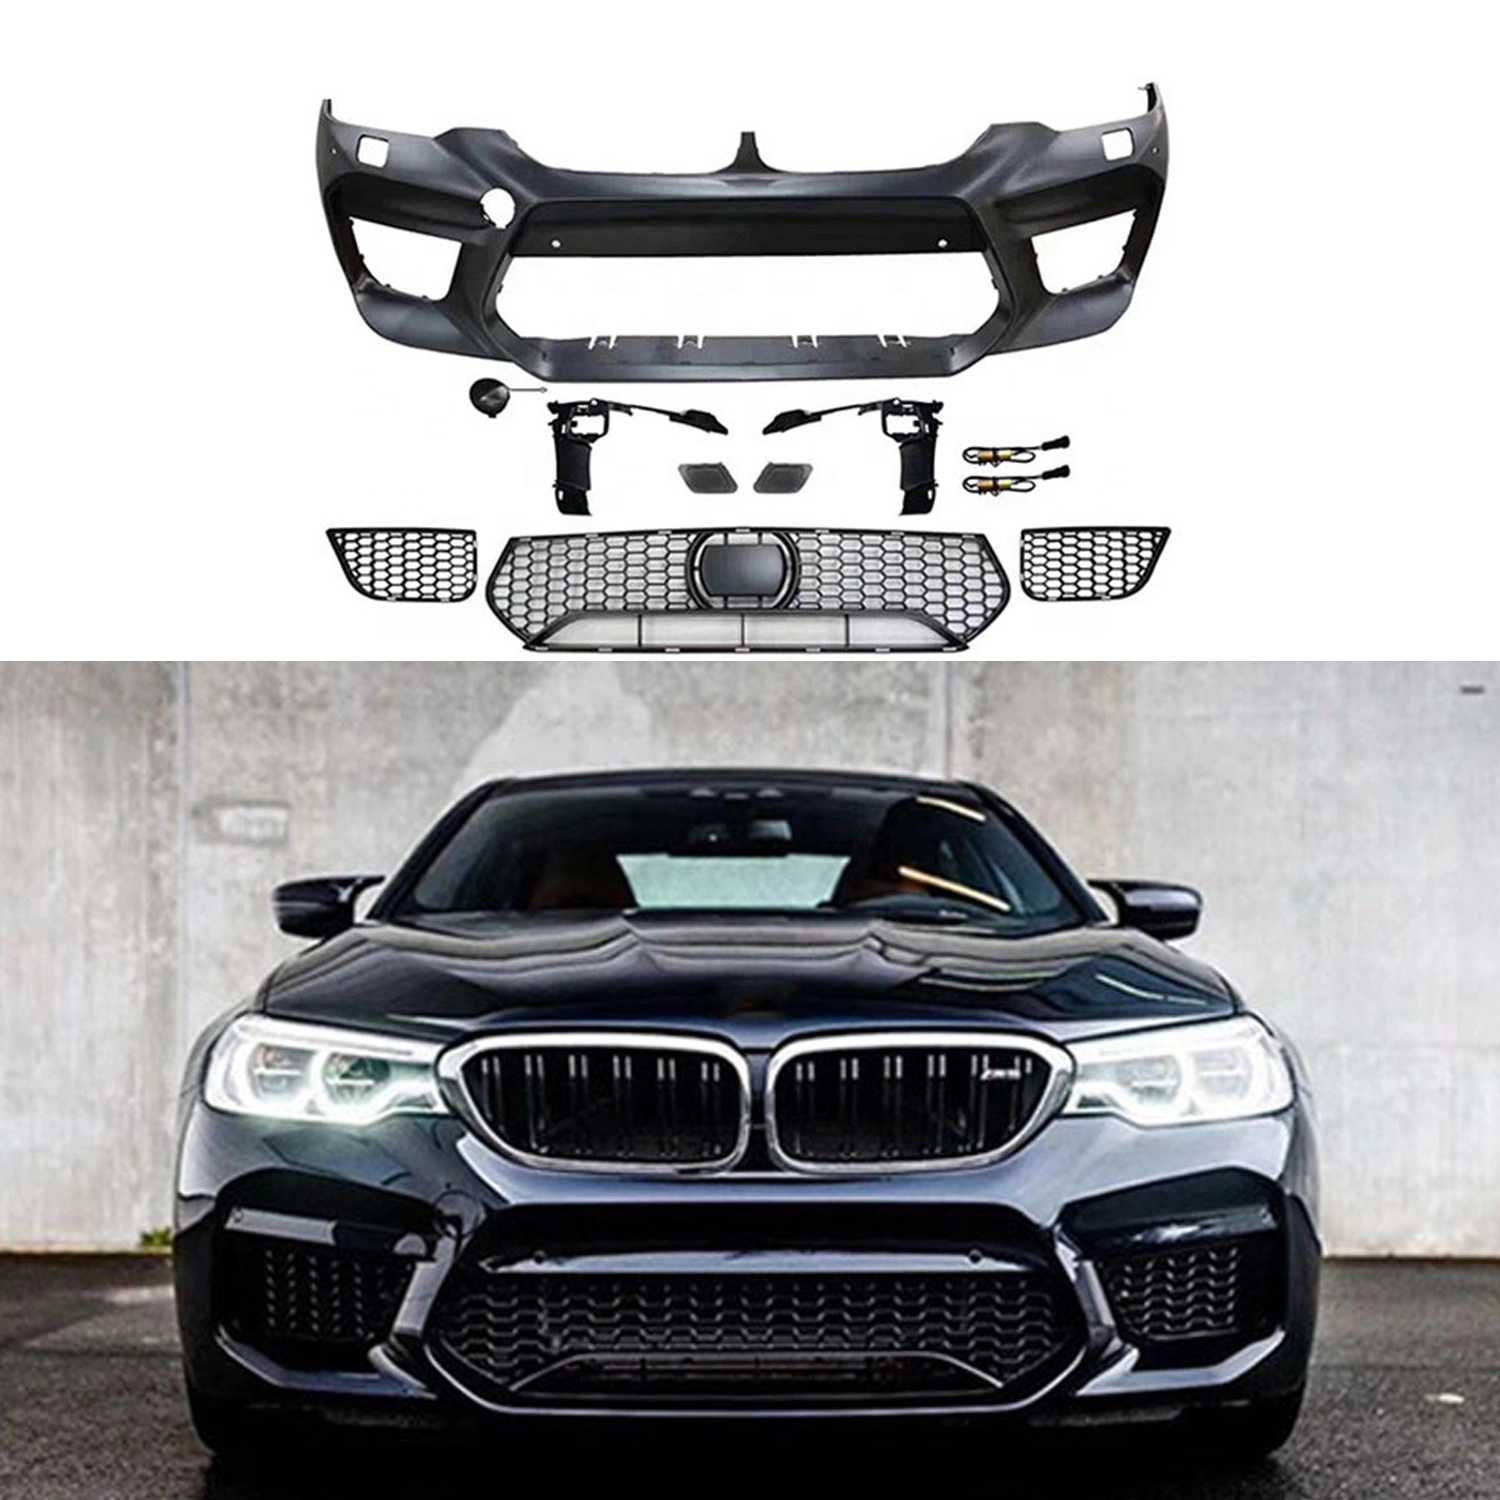 M5 Style PP Plastic Body Kit for BMW 5 Series G30